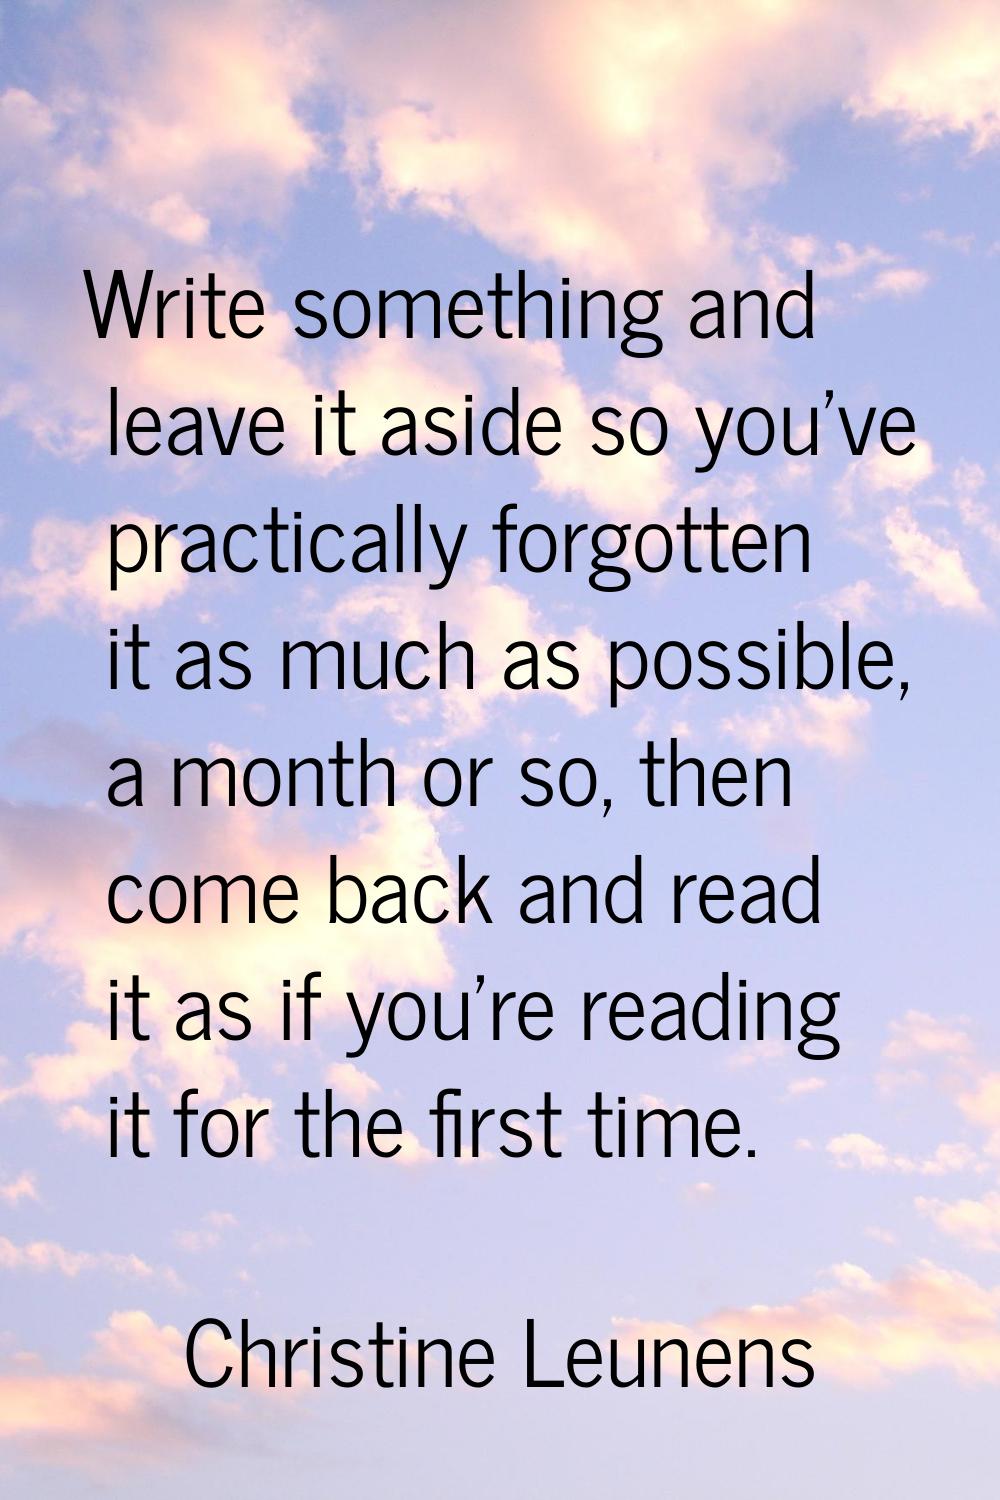 Write something and leave it aside so you've practically forgotten it as much as possible, a month 